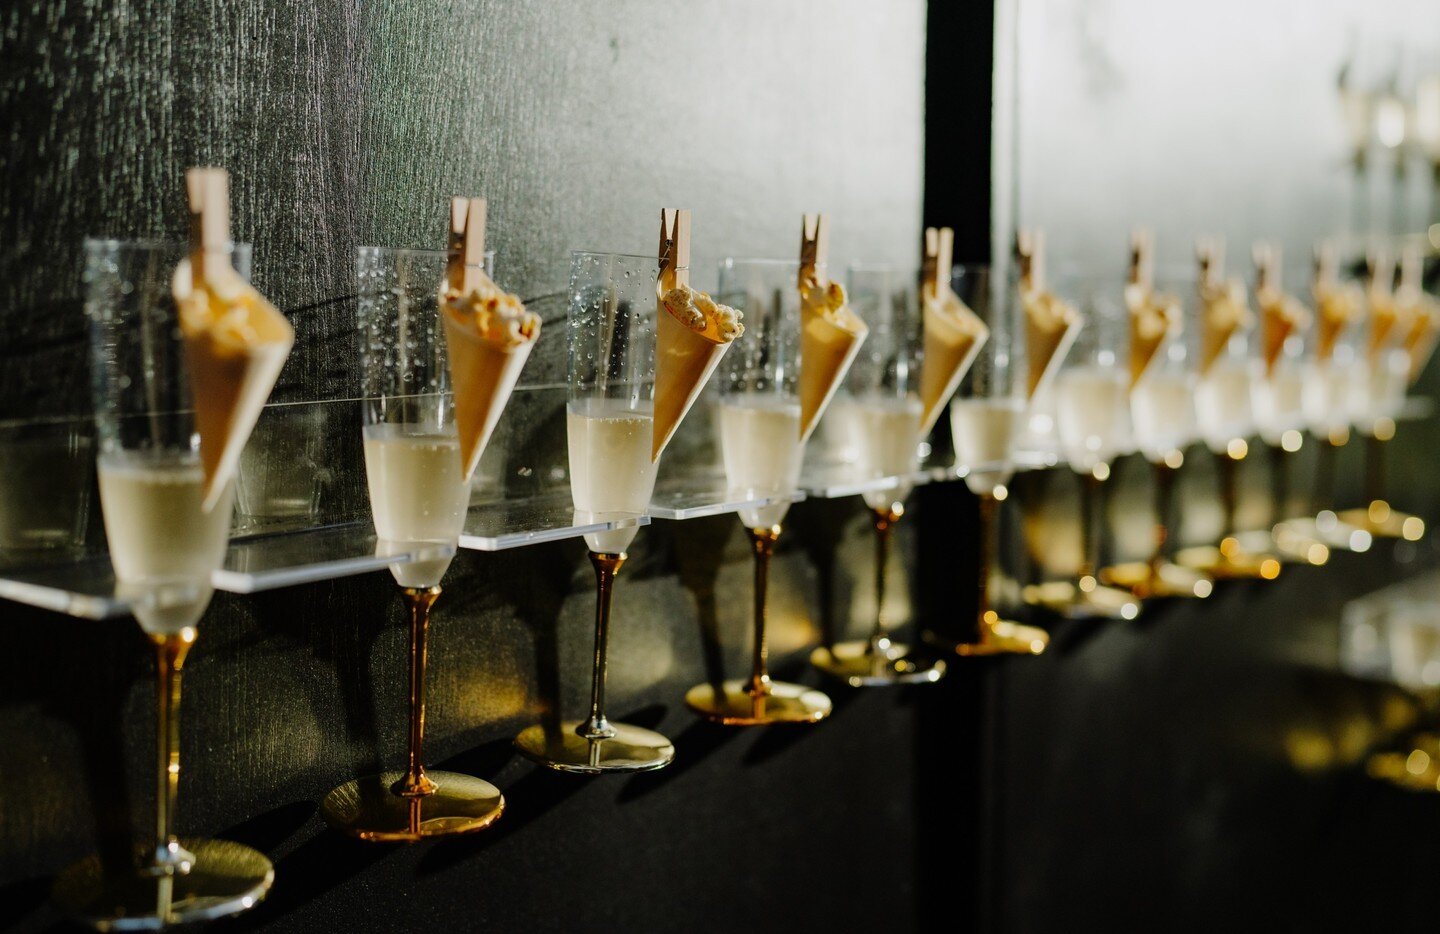 Welcome your guest with simple touches to your event that Speak Sophisticated Hospitality but are Stylish.  Eco-friendly disposable flutes with gold bottoms filled with champagne are stunning, especially paired with a tiny cone filled with popcorn. B